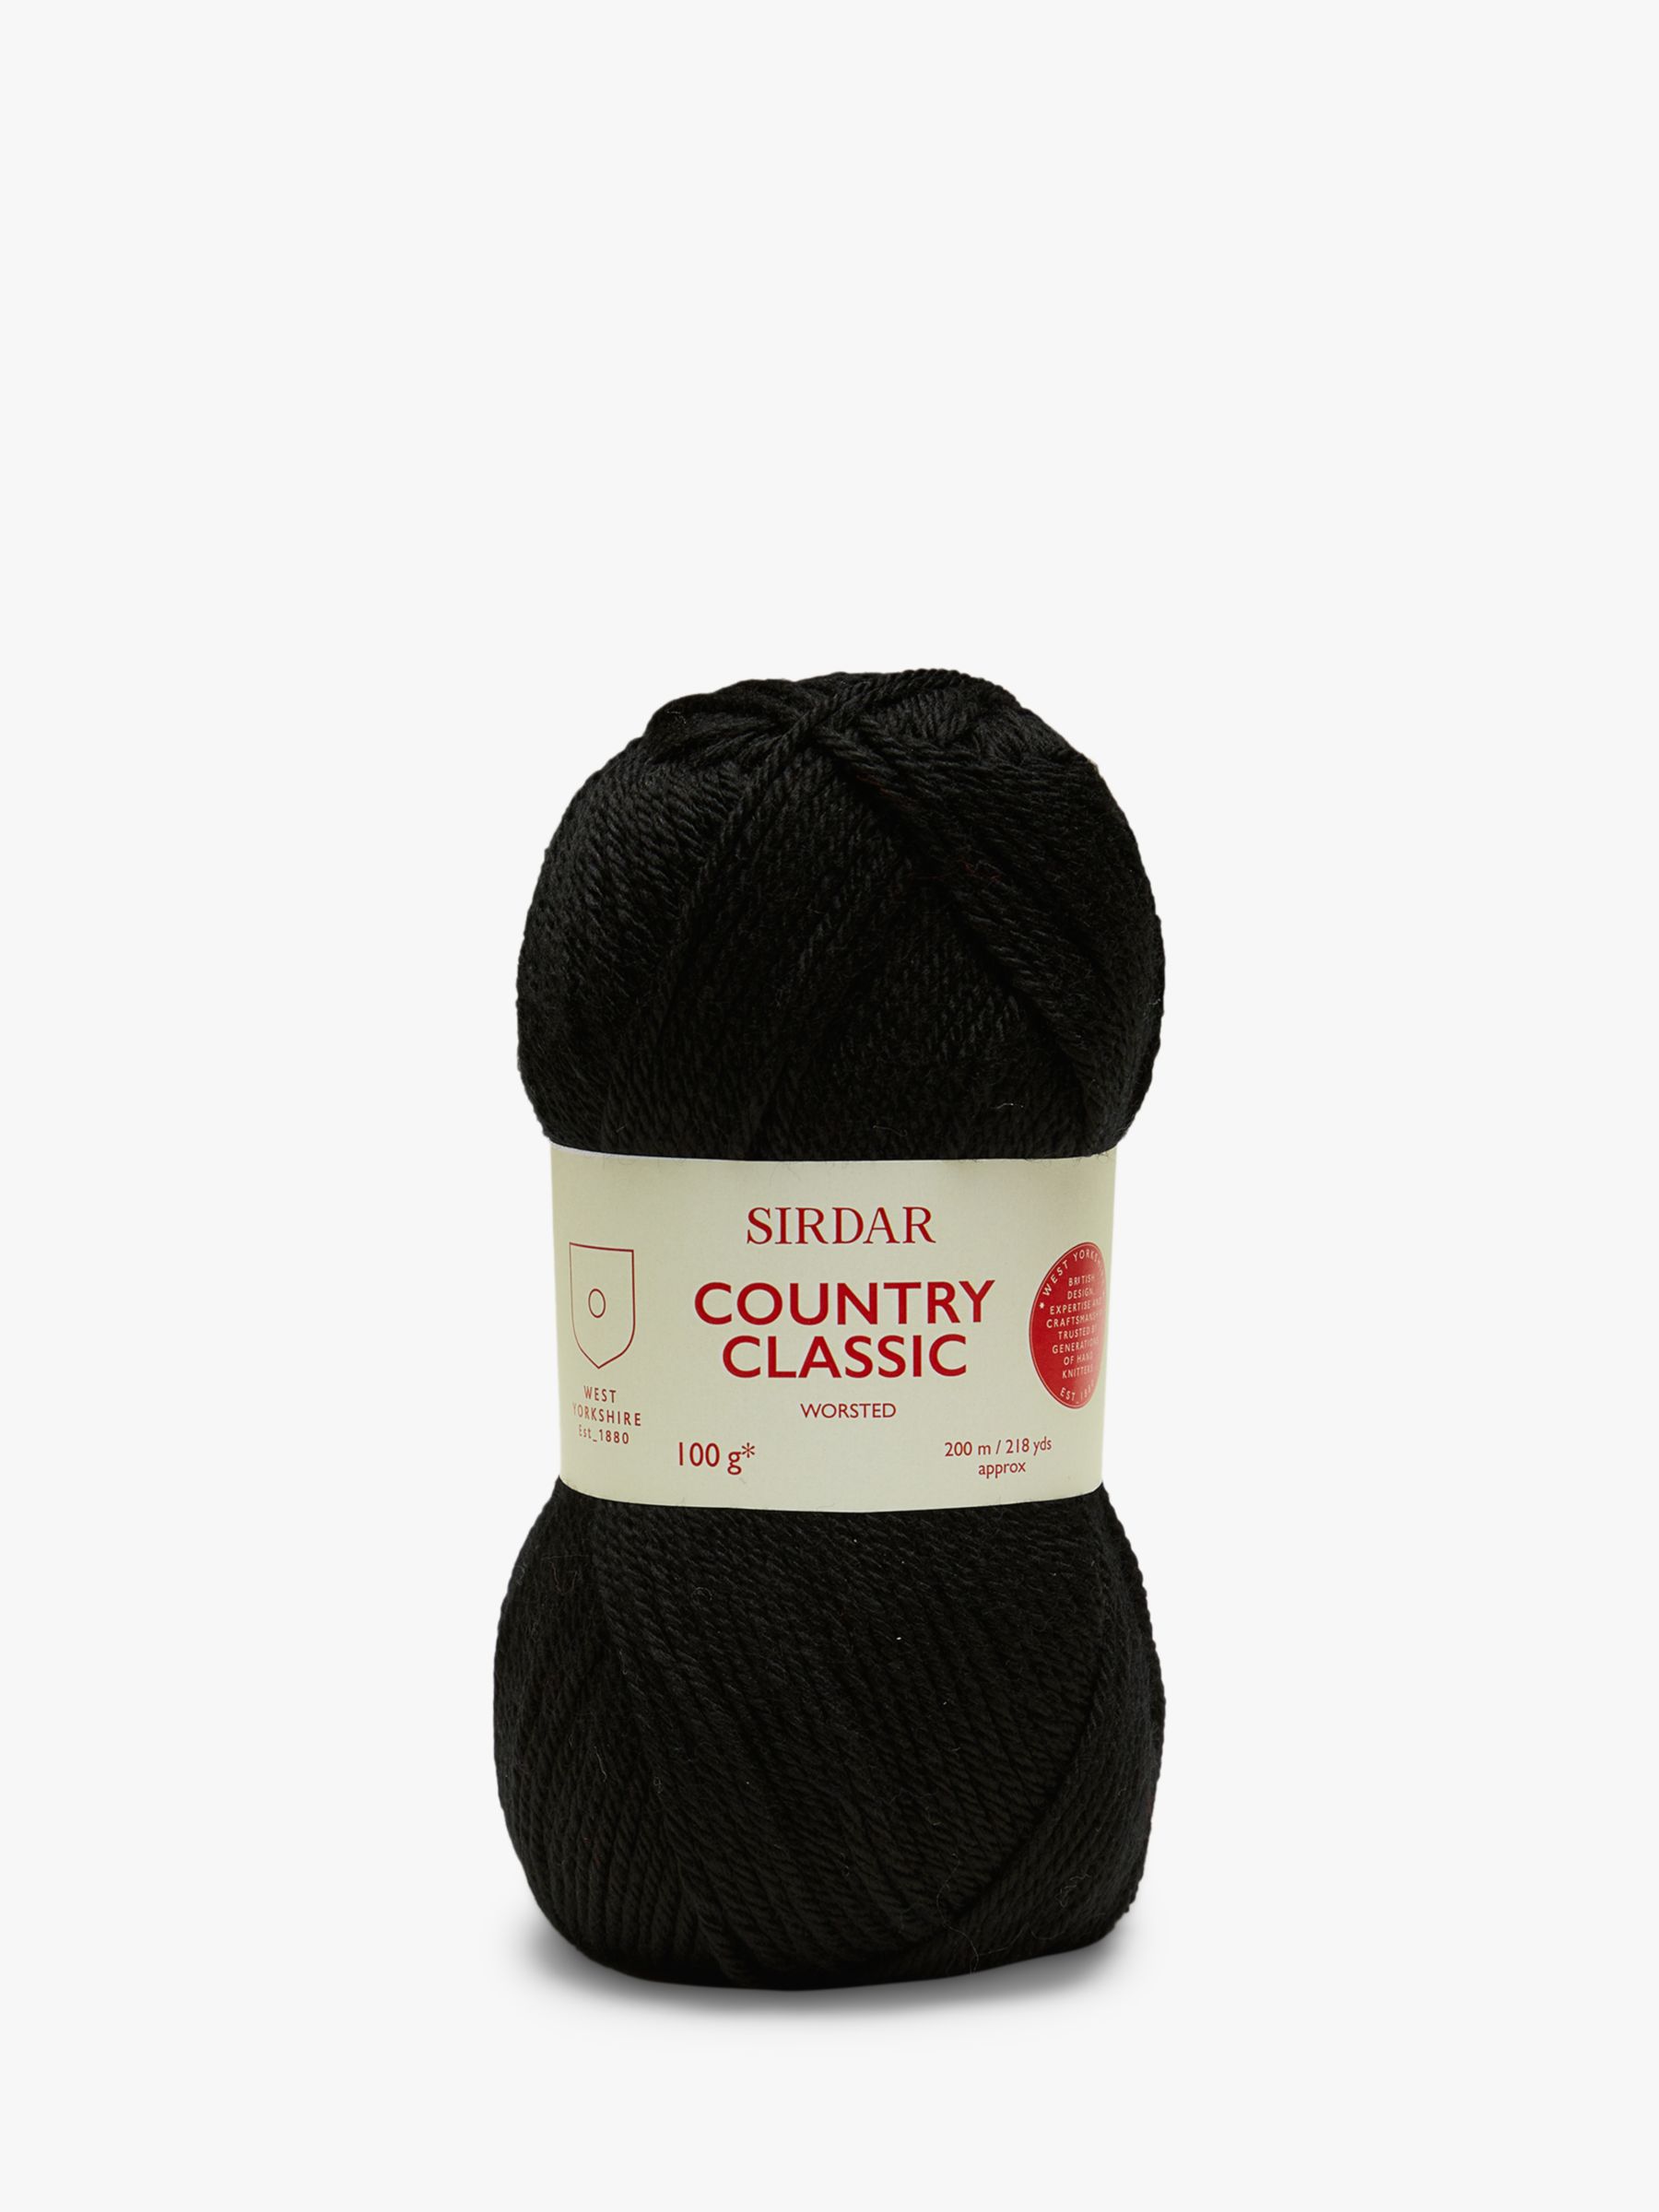 Sirdar Country Classic Worsted - All Colours - Wool Warehouse - Buy Yarn,  Wool, Needles & Other Knitting Supplies Online!